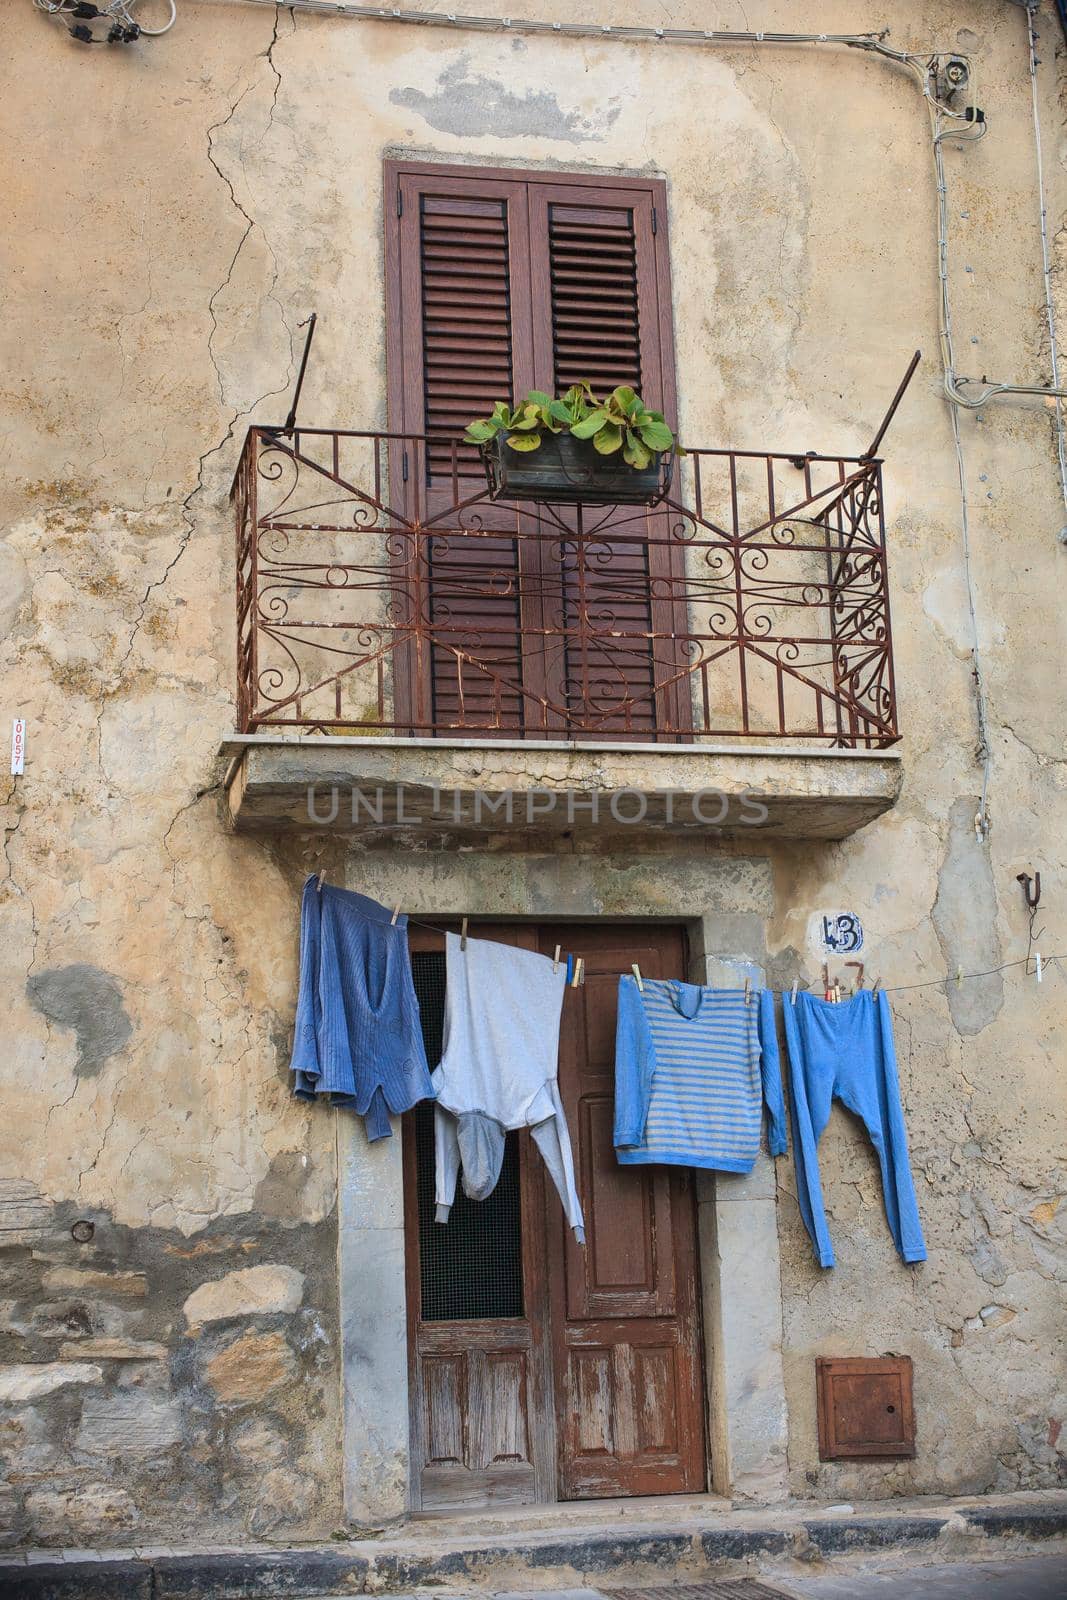 Clothes hanging to dry on a clothes-line next to the door